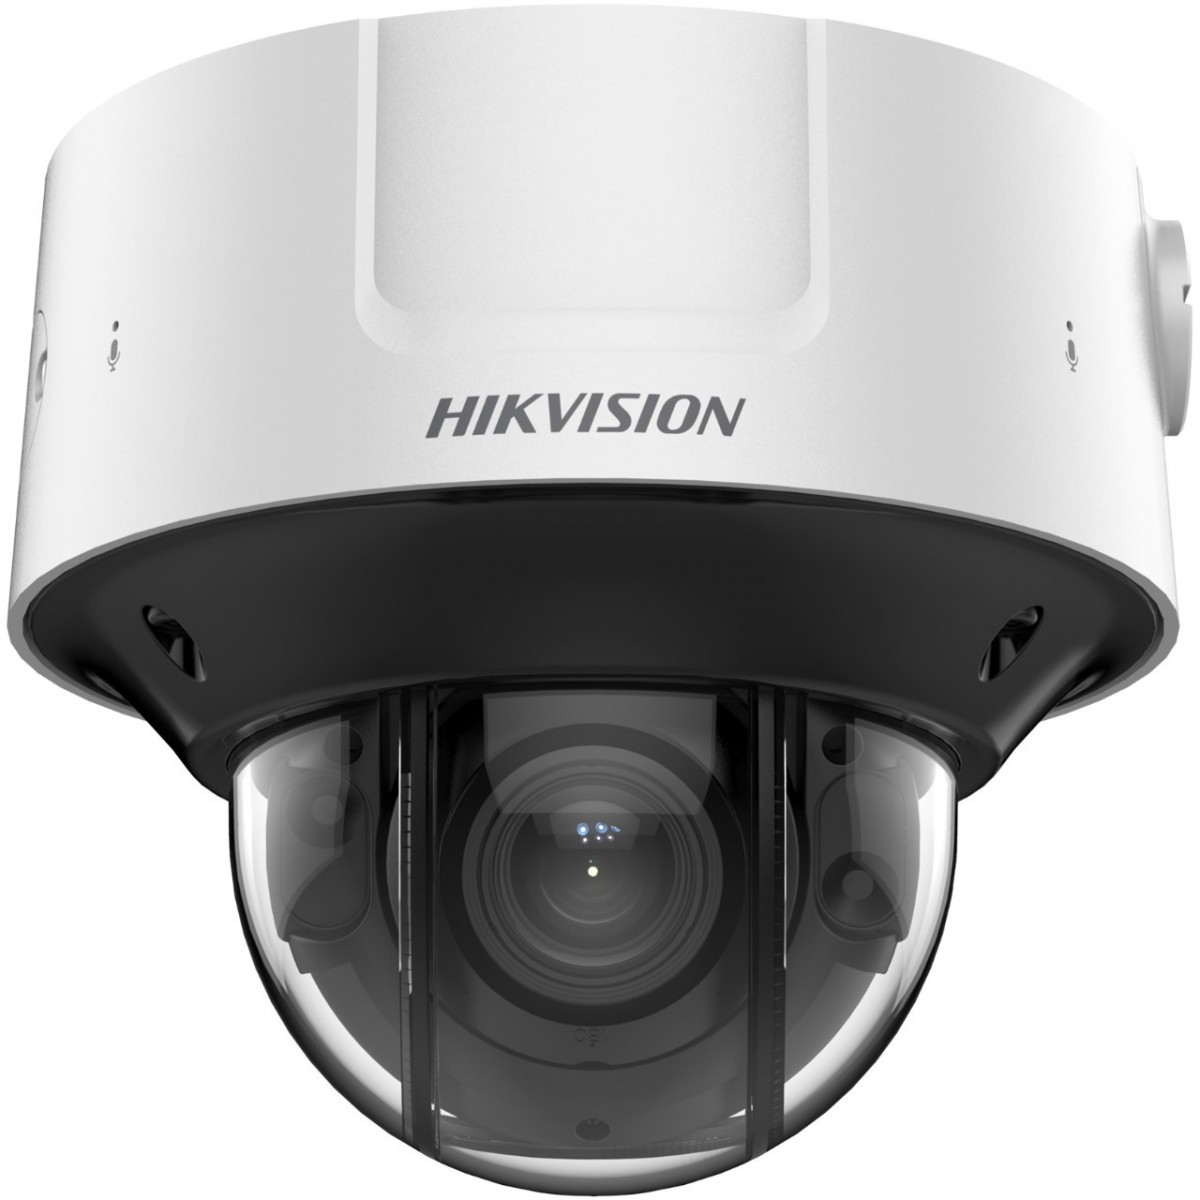 Hikvision Digital Technology IDS-2CD7546G0-IZHSY - IP security camera - Outdoor - Wired - Cube - Ceiling/wall - White